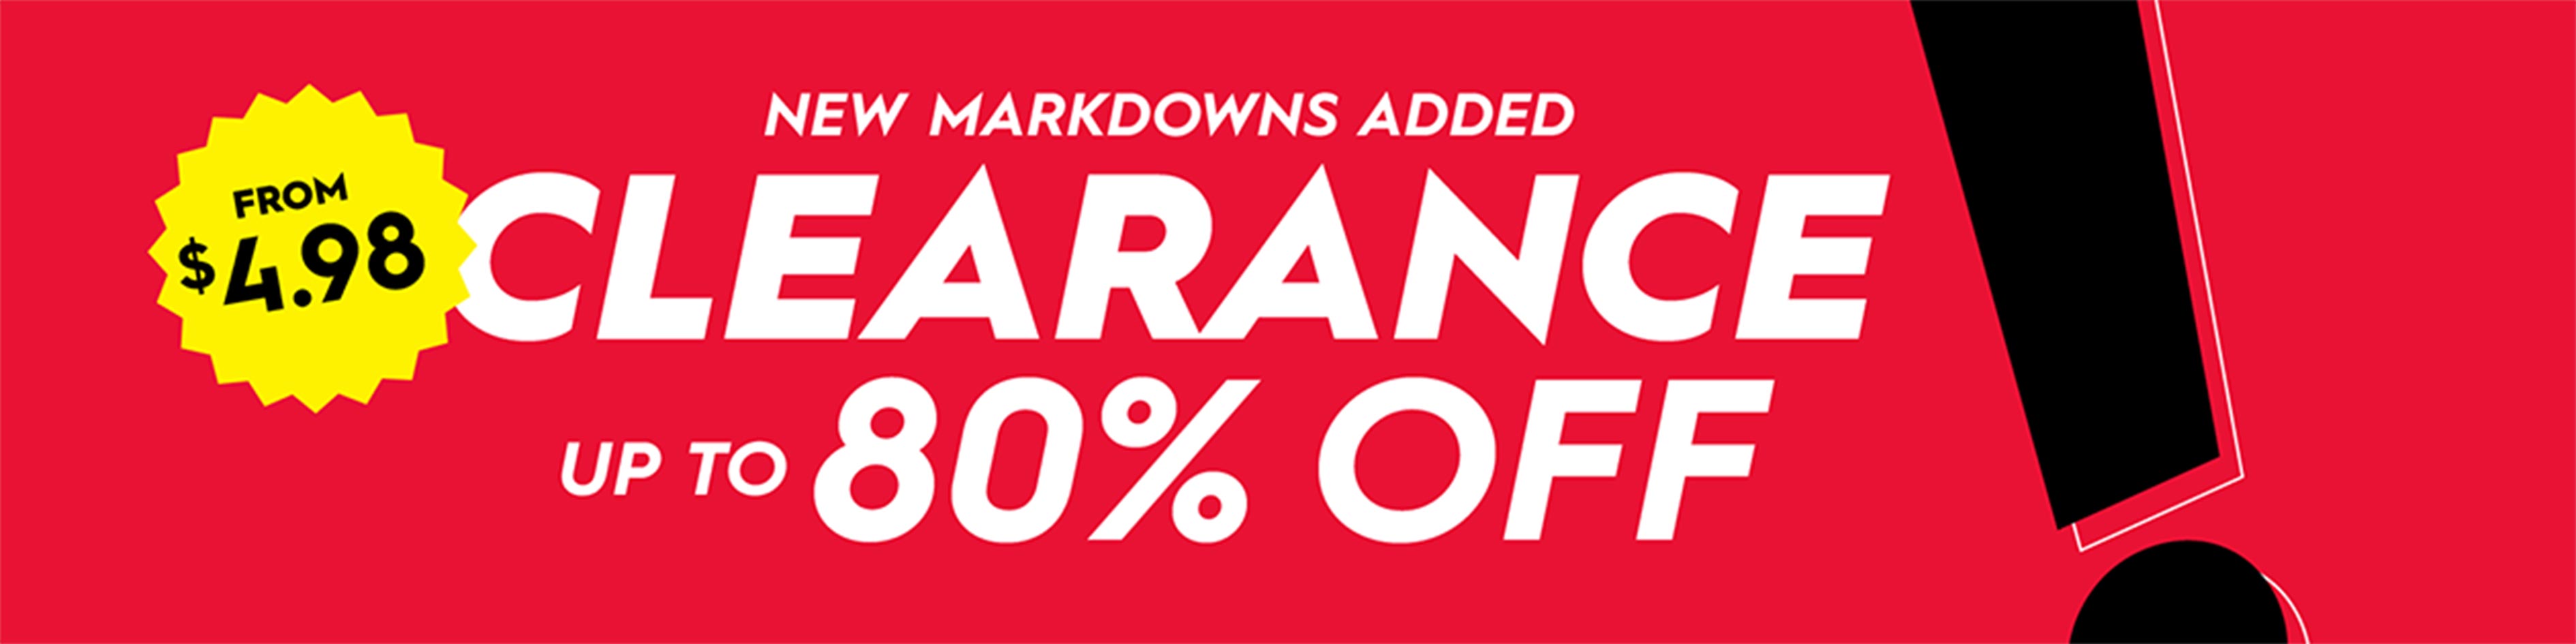 Clearance up to 80% off